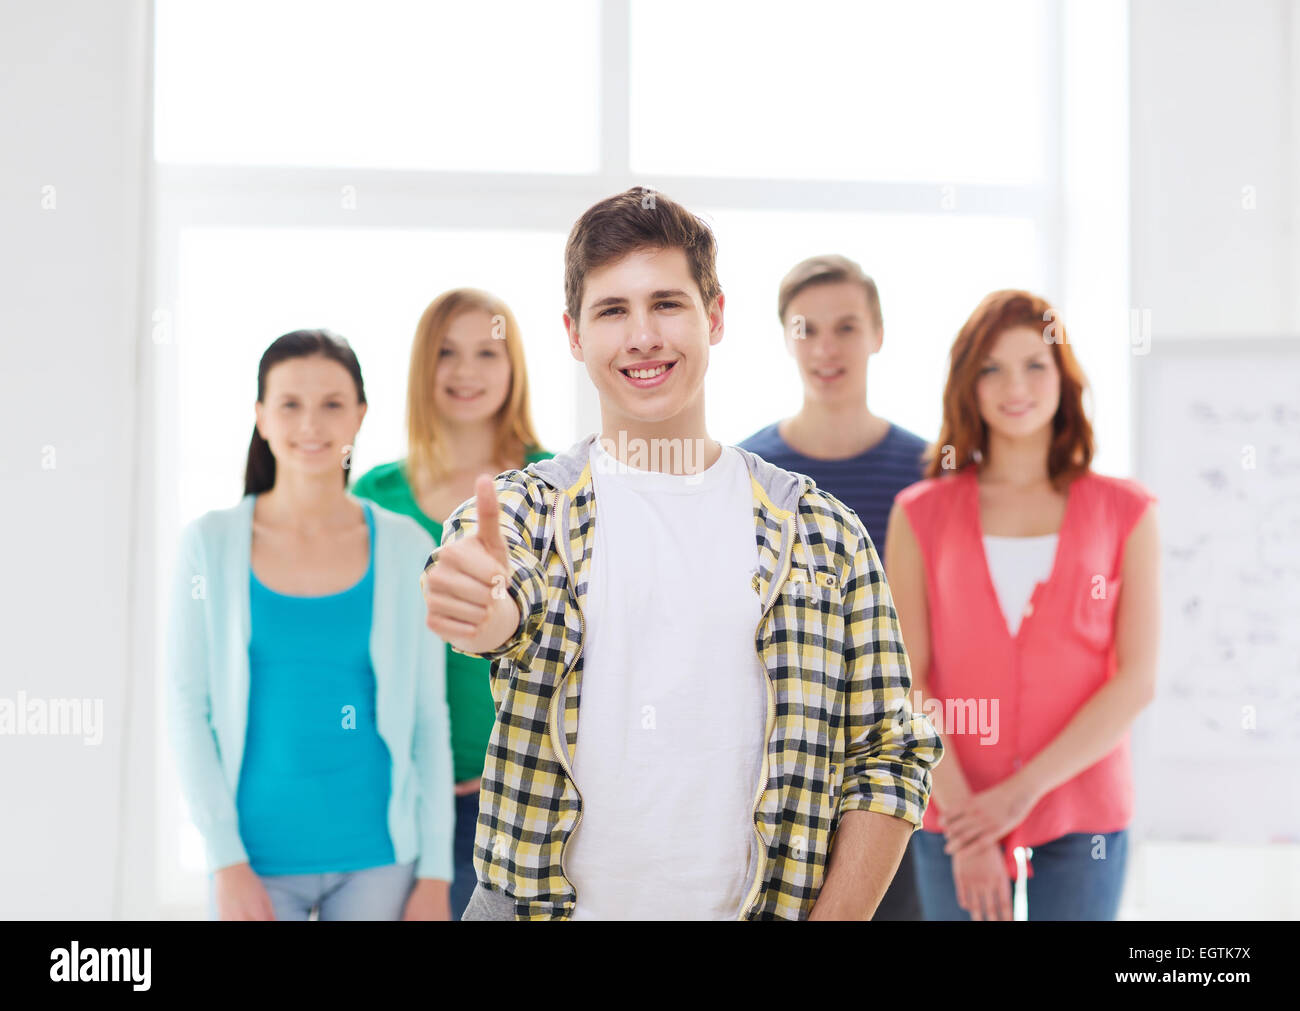 male student with classmates showing thumbs up Stock Photo - Alamy